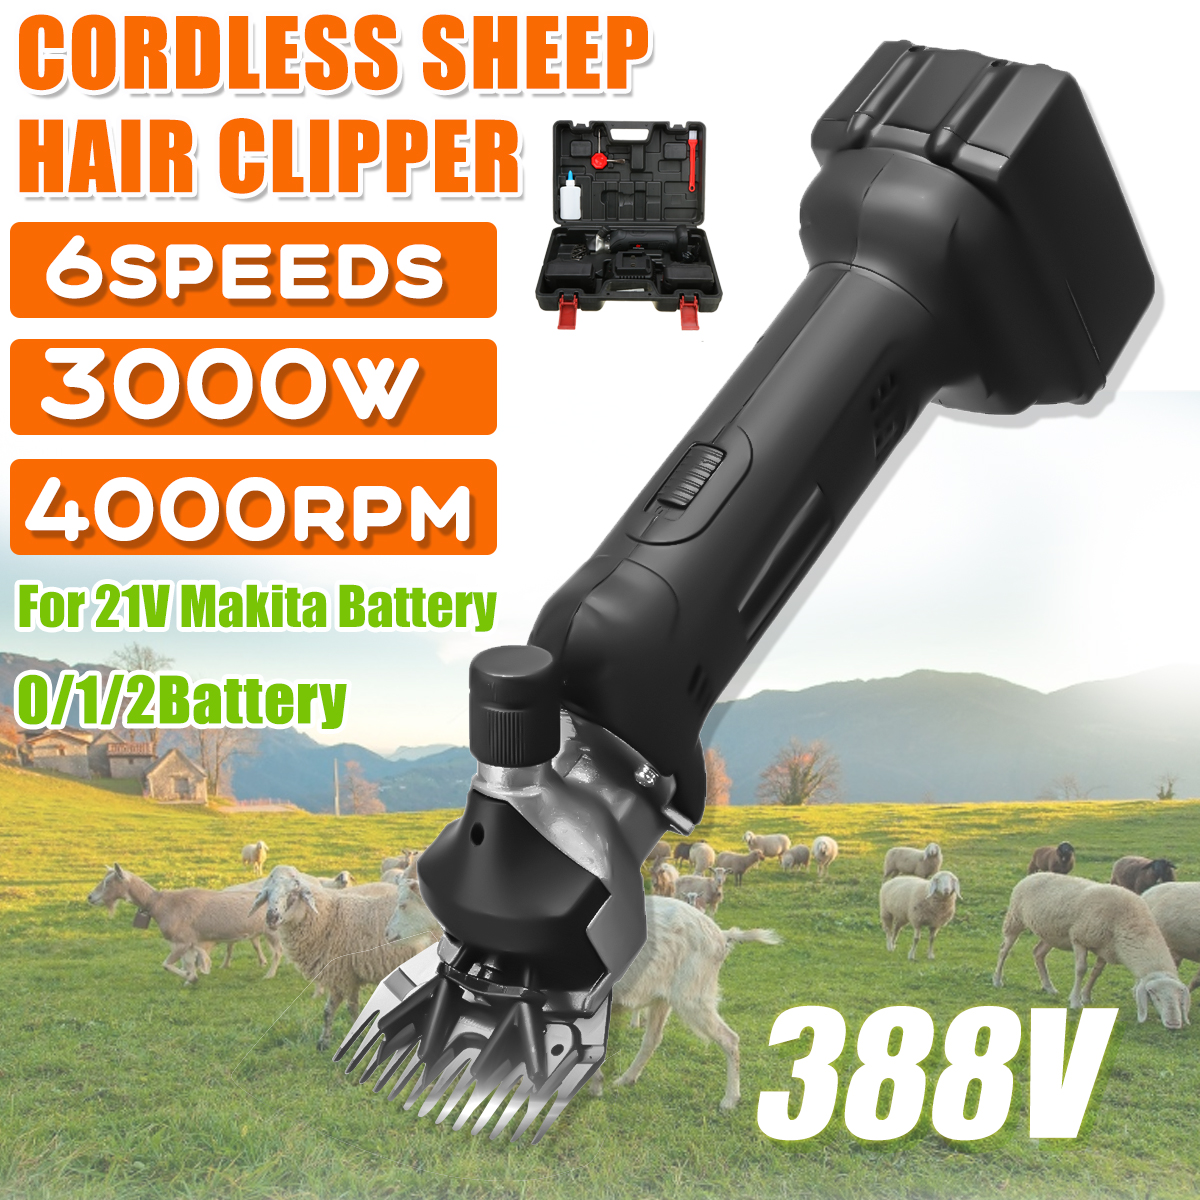 21V-Cordless-Electric-Sheep-Pet-Hair-Clipper-6-Speed-Wool-Trimmer-Shearing-Machine-W-None12-Battery--1878850-2